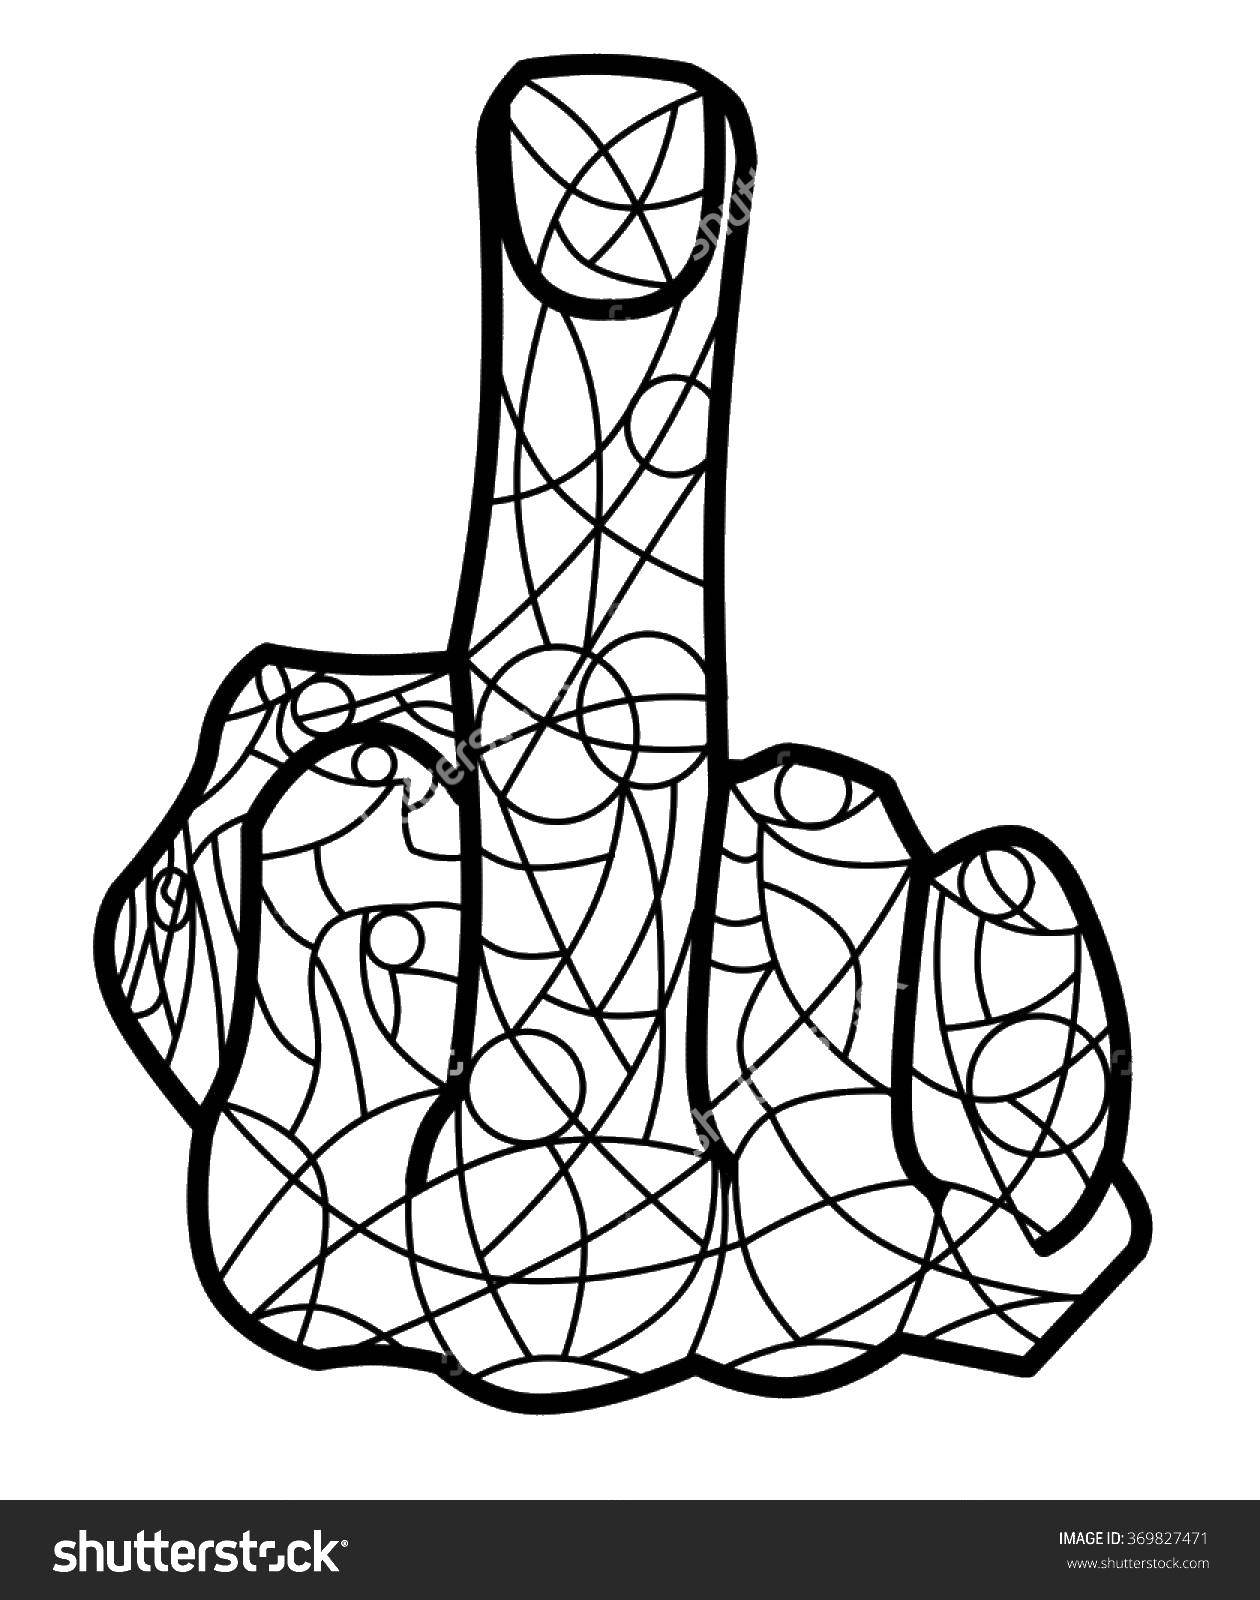 Coloring The middle finger and patterns. Category coloring. Tags:  palm, finger patterns.